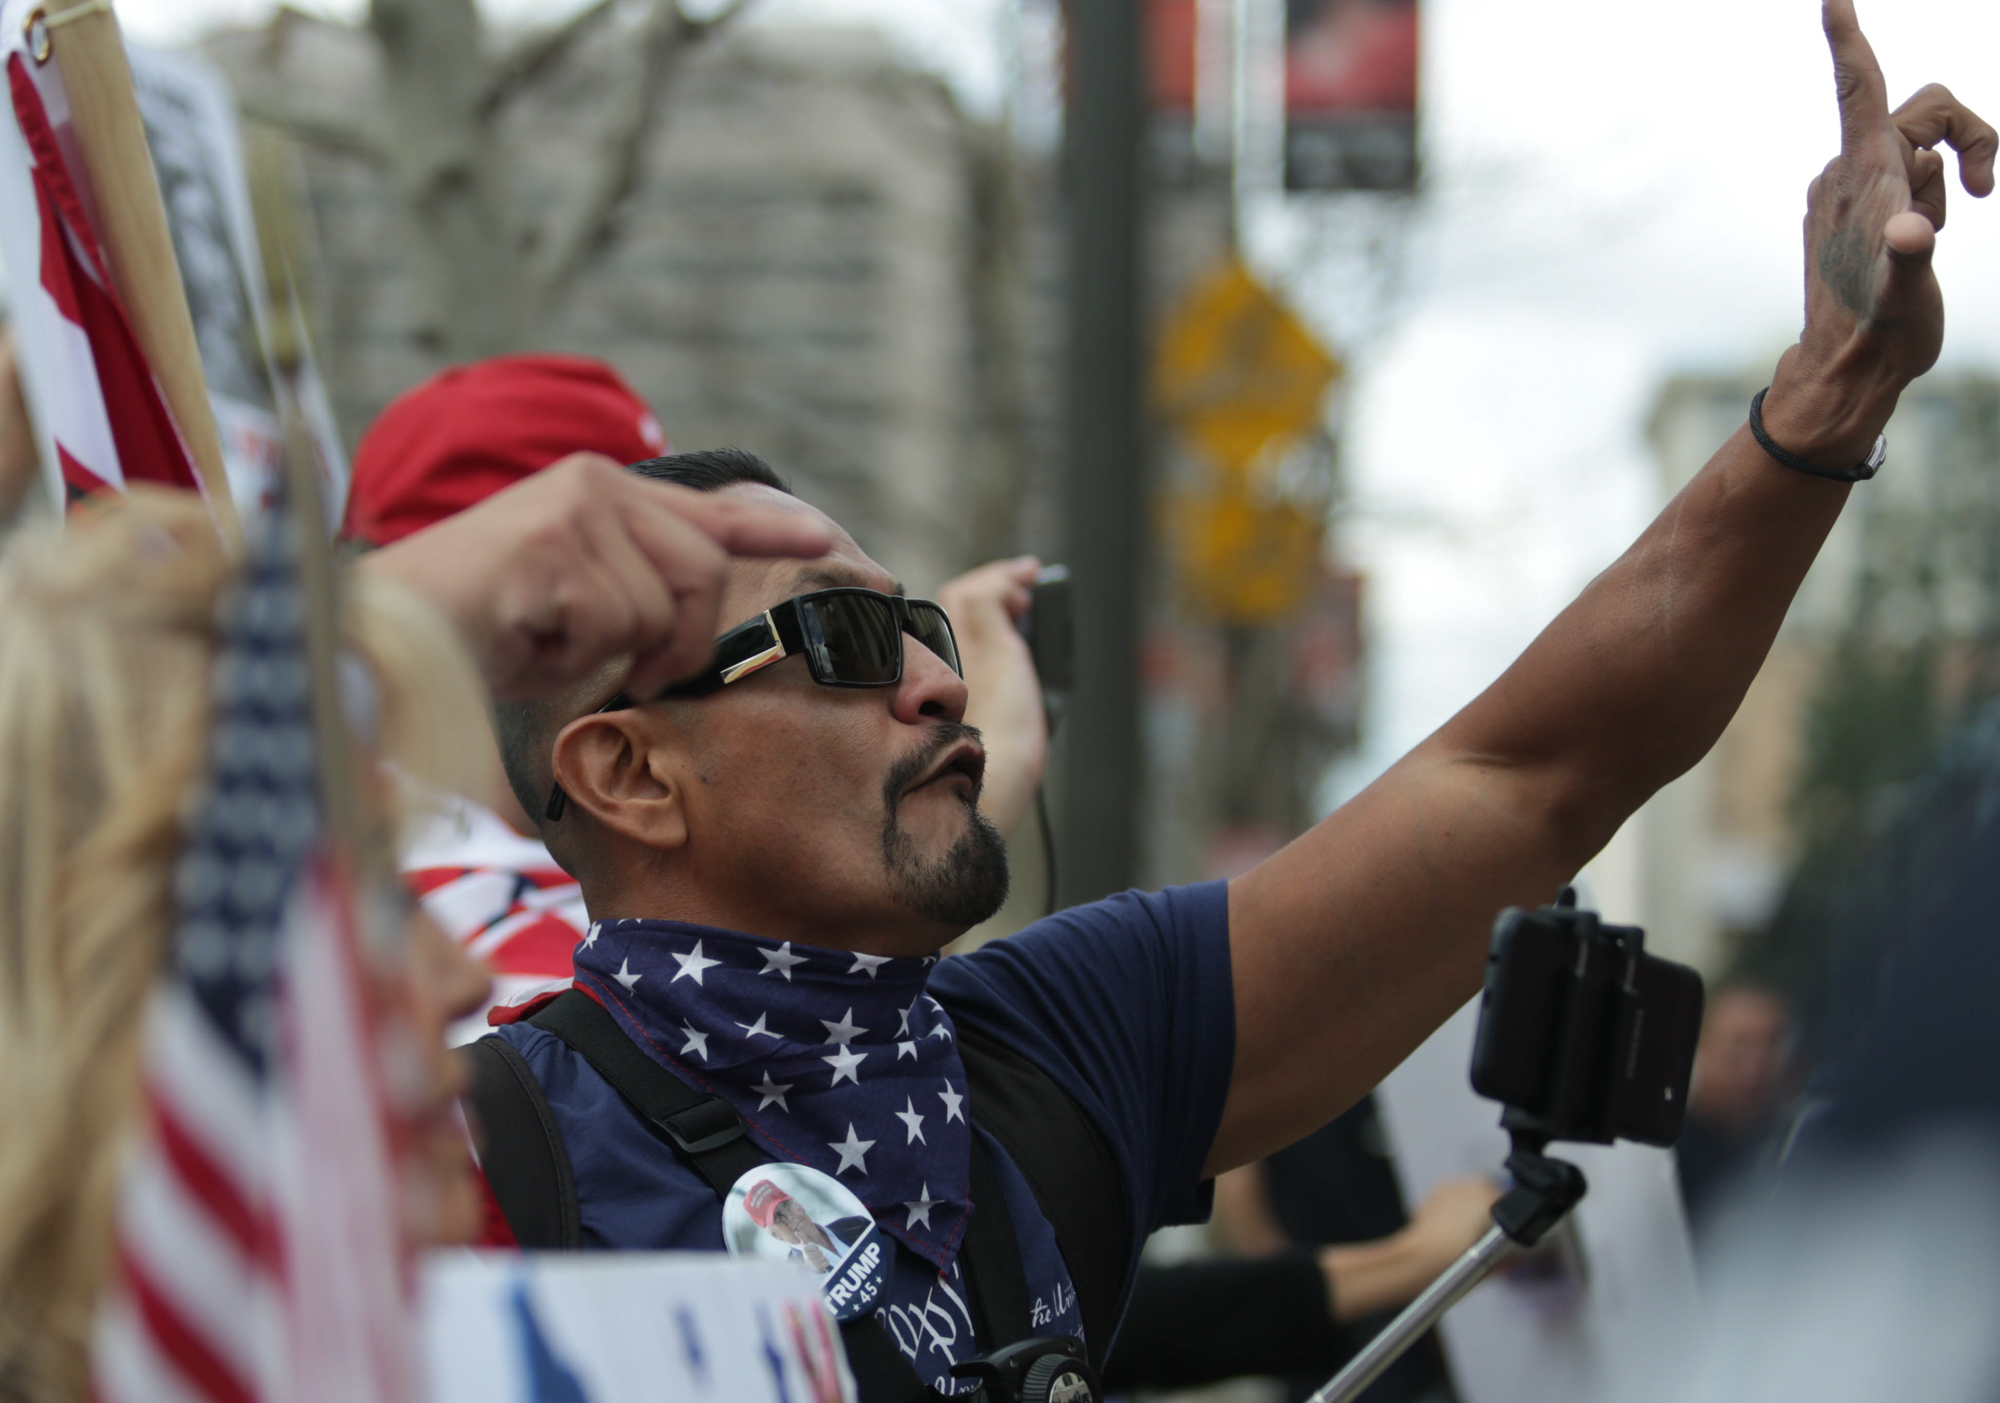  One of the loudest voices of the day, Harim Ucciel, made it known that he was an educated latino who was pro Donald Trump. Ucciel showed his support for the 2nd Amendment at the March for Life in Downtown Los Angeles. Events took place on Saturday, 